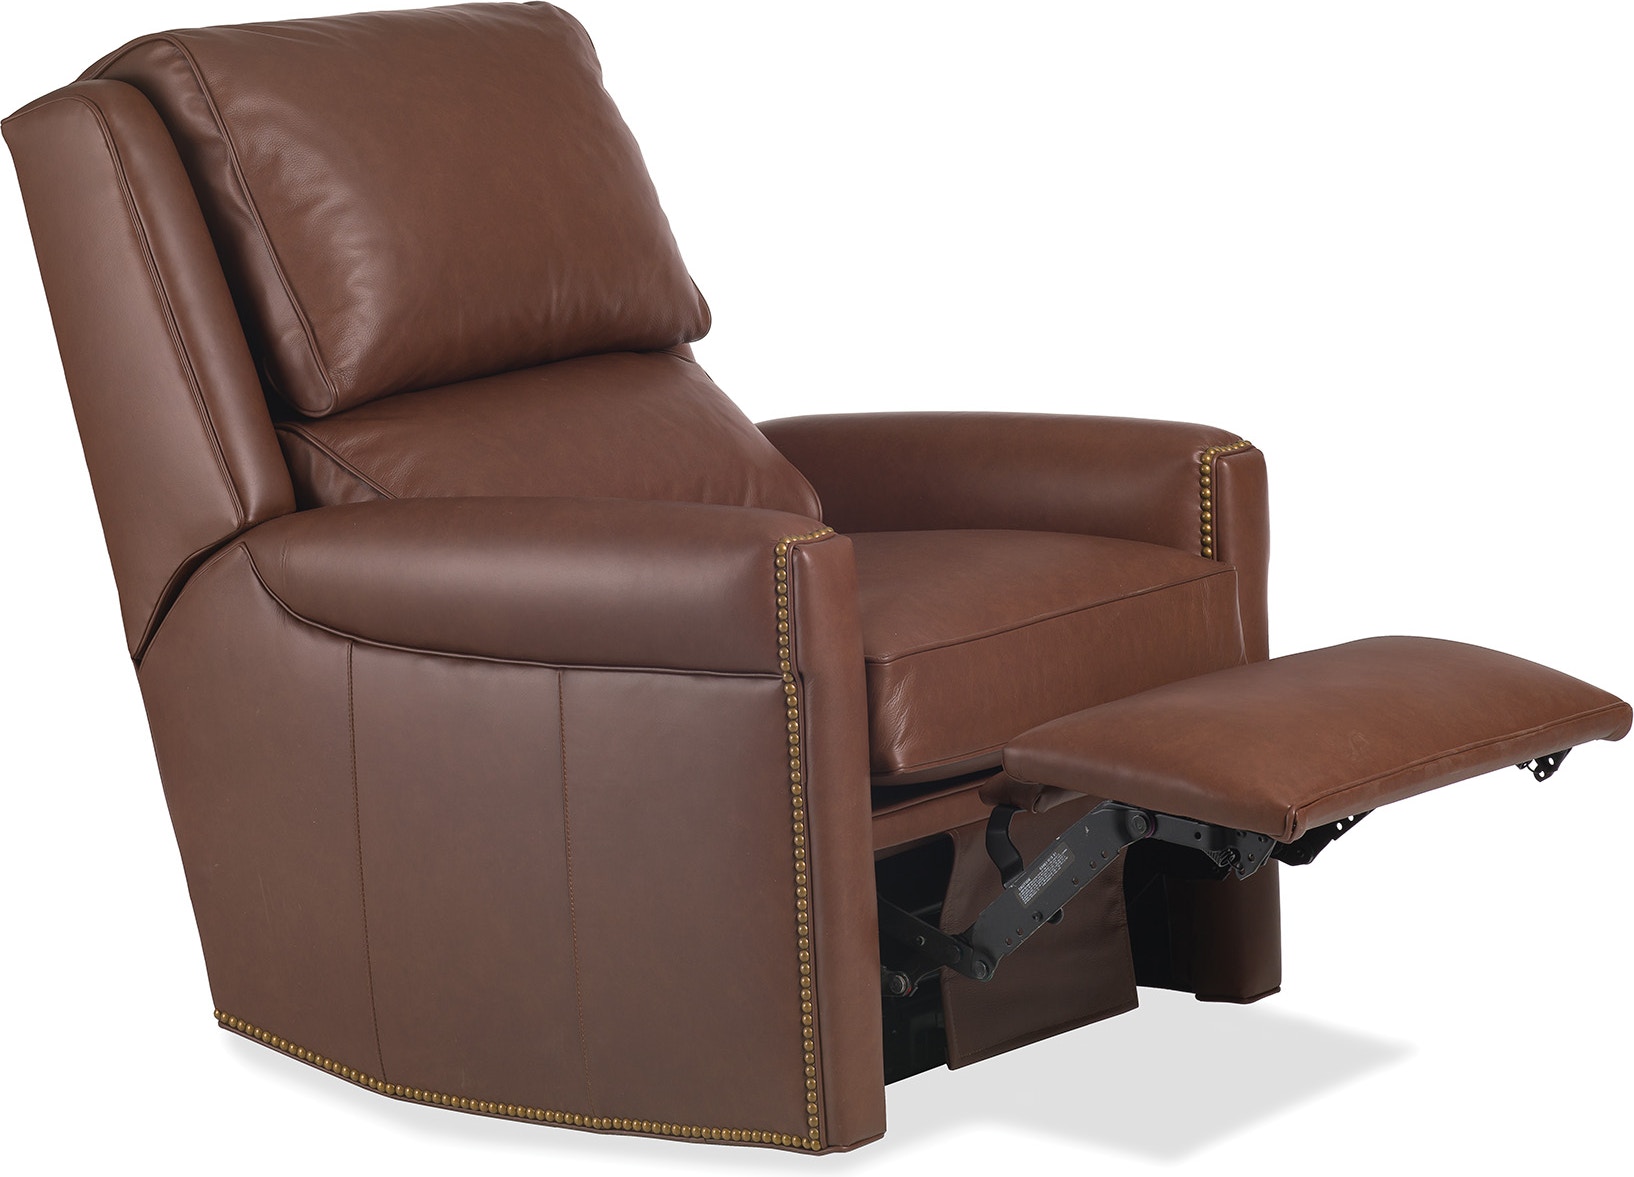 Brayna 35 Classic Leather Pushback Recliner, Created for Macy's